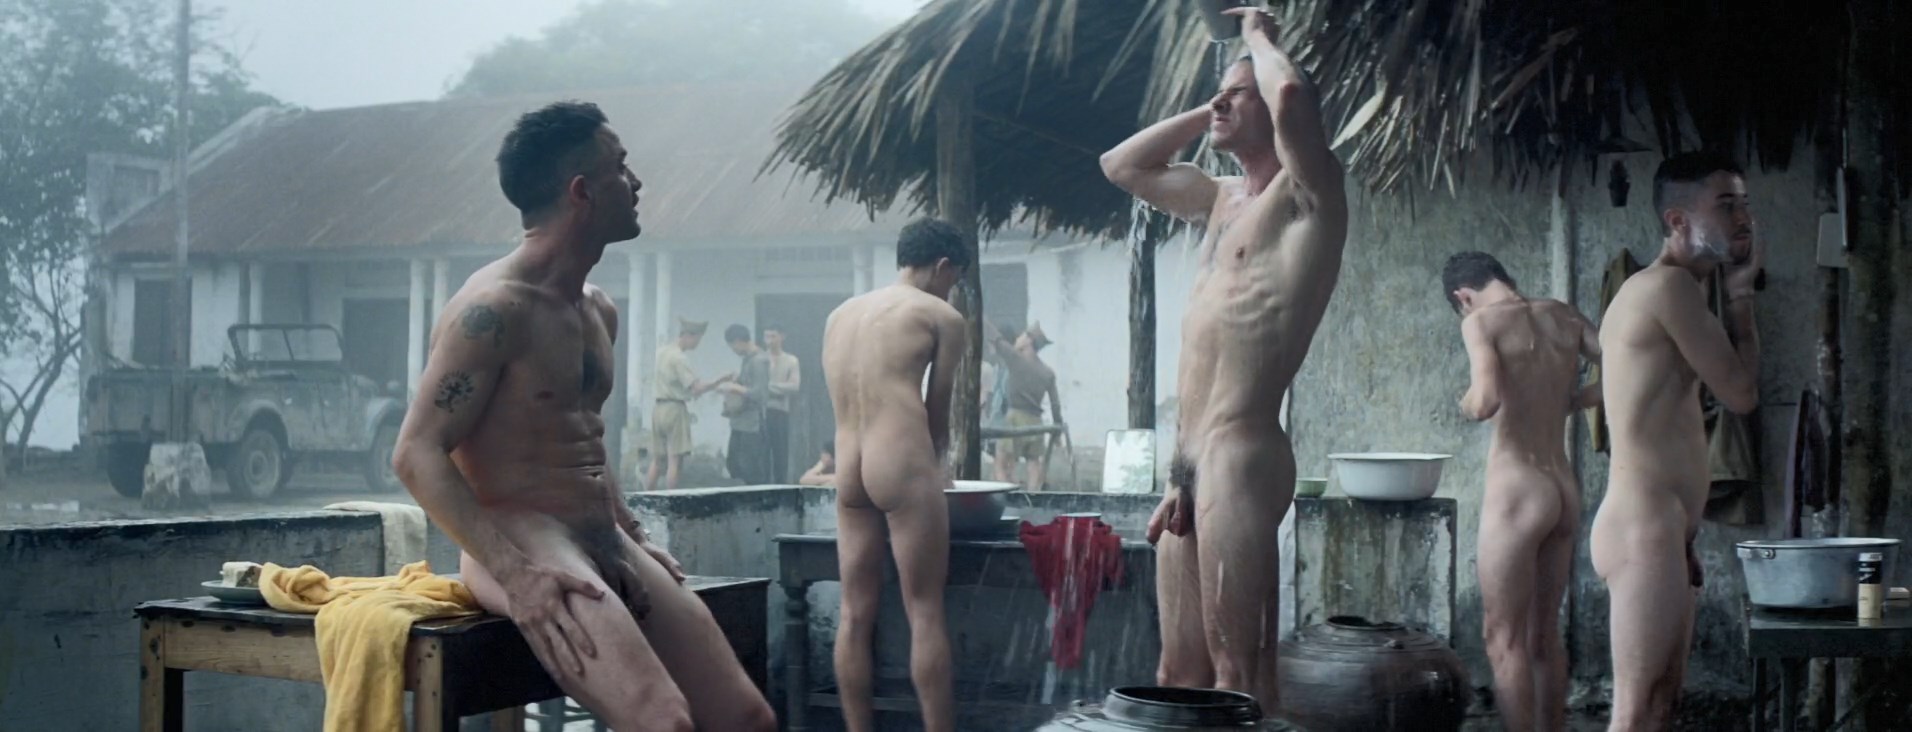 Frontal Male Nudity In Mainstream Movies